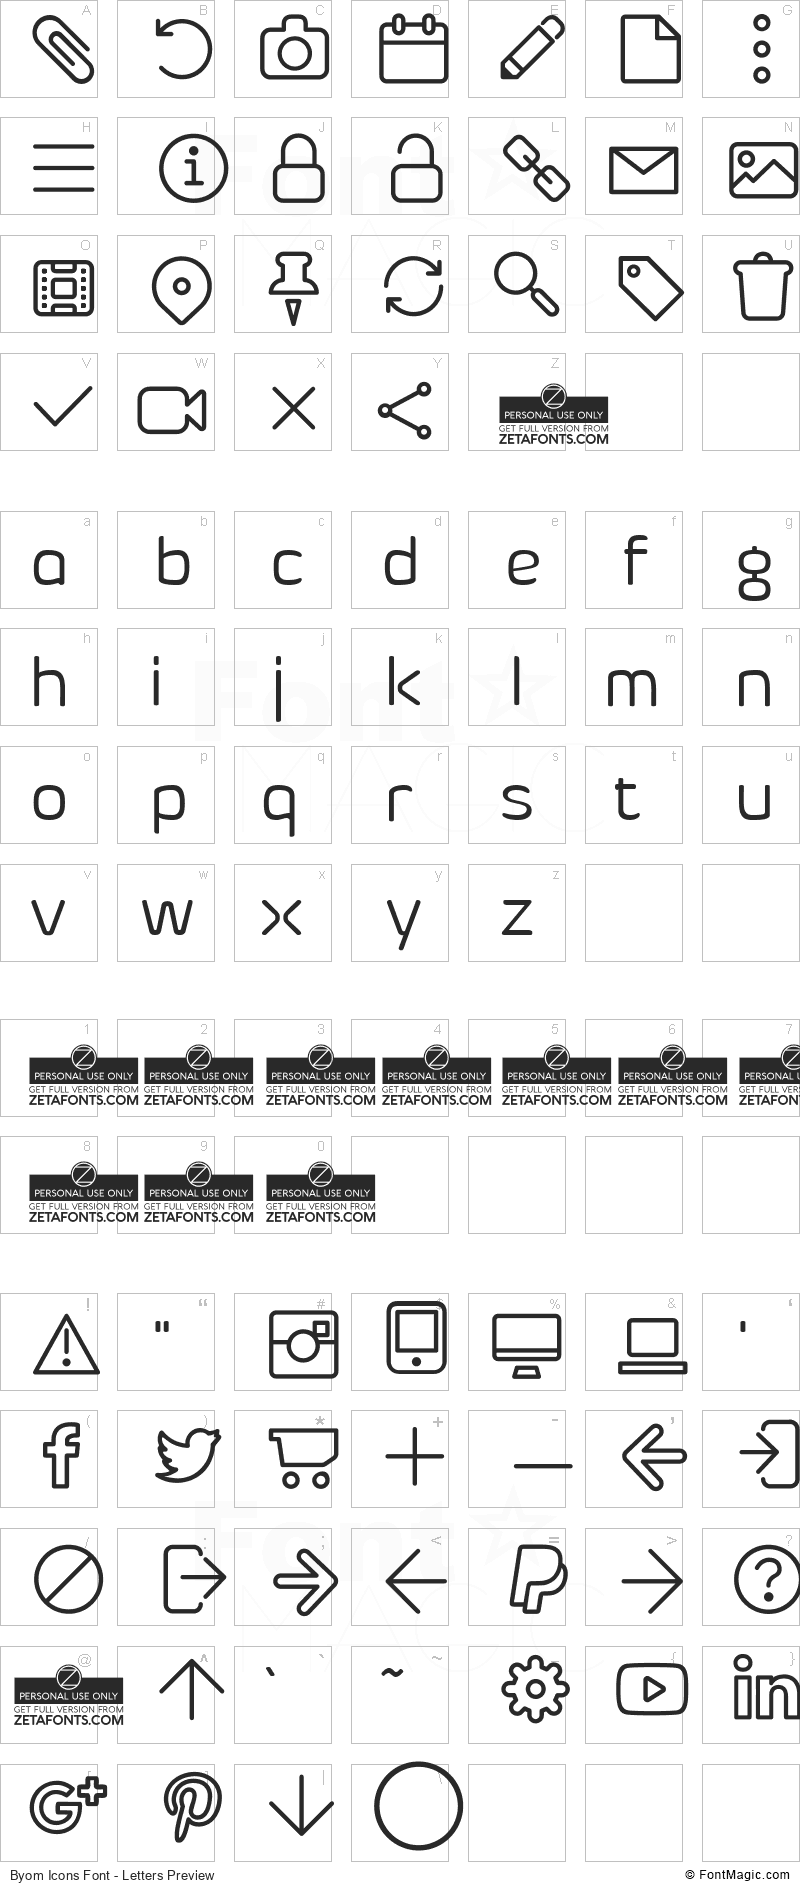 Byom Icons Font - All Latters Preview Chart